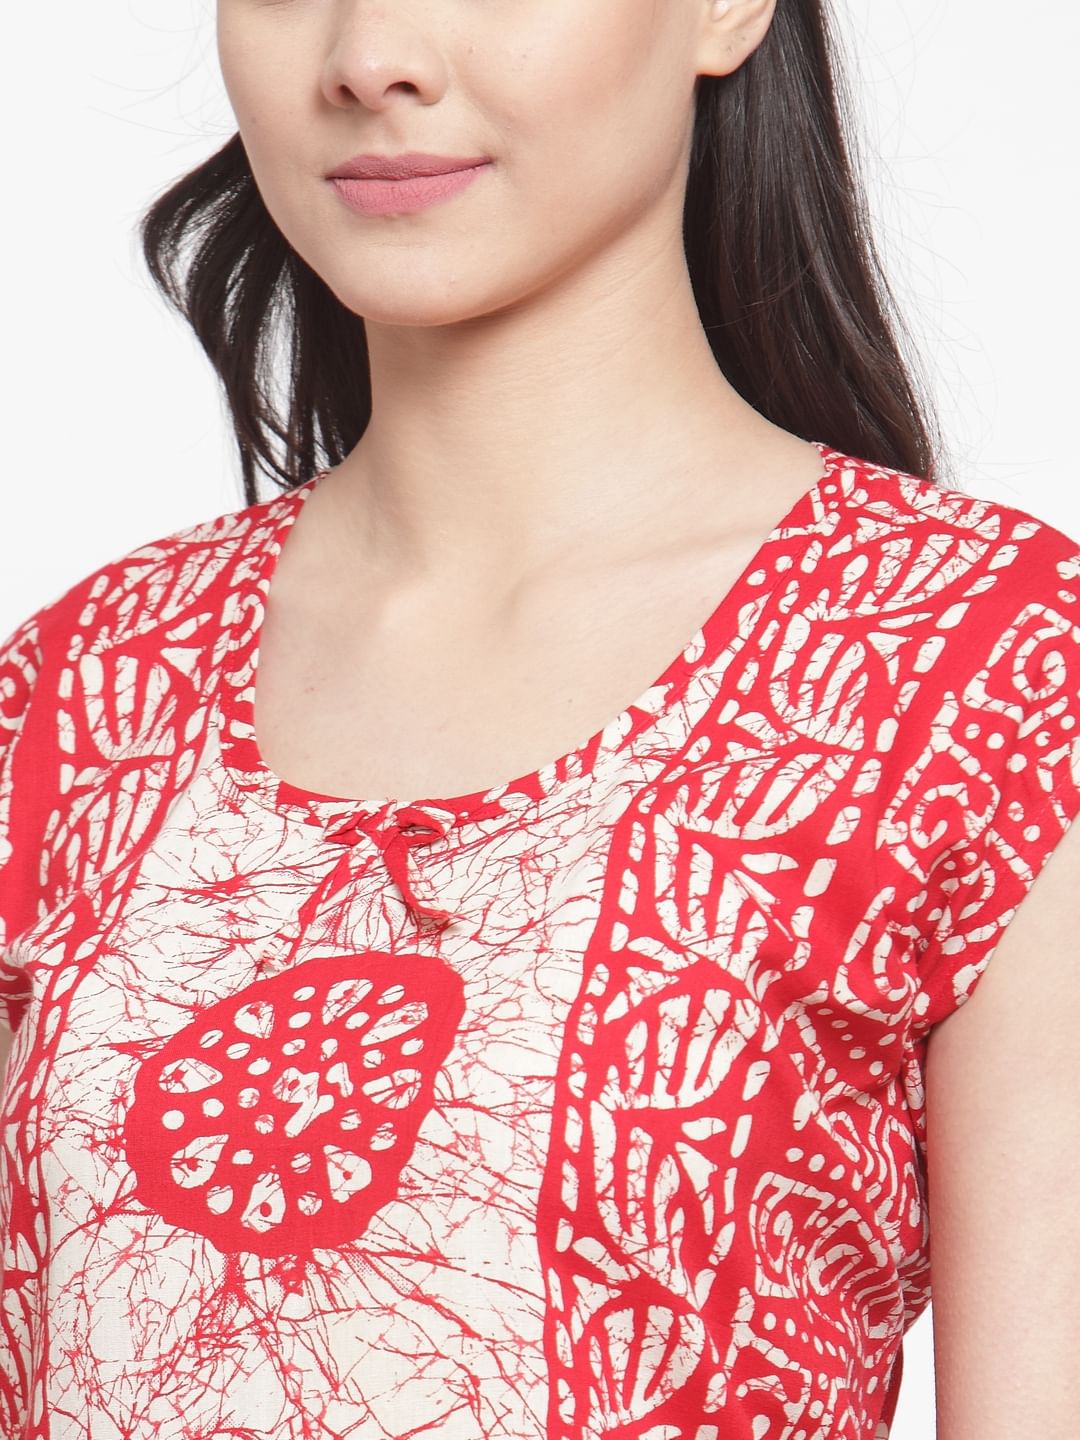 Red Cotton Printed Nighty (Free Size)